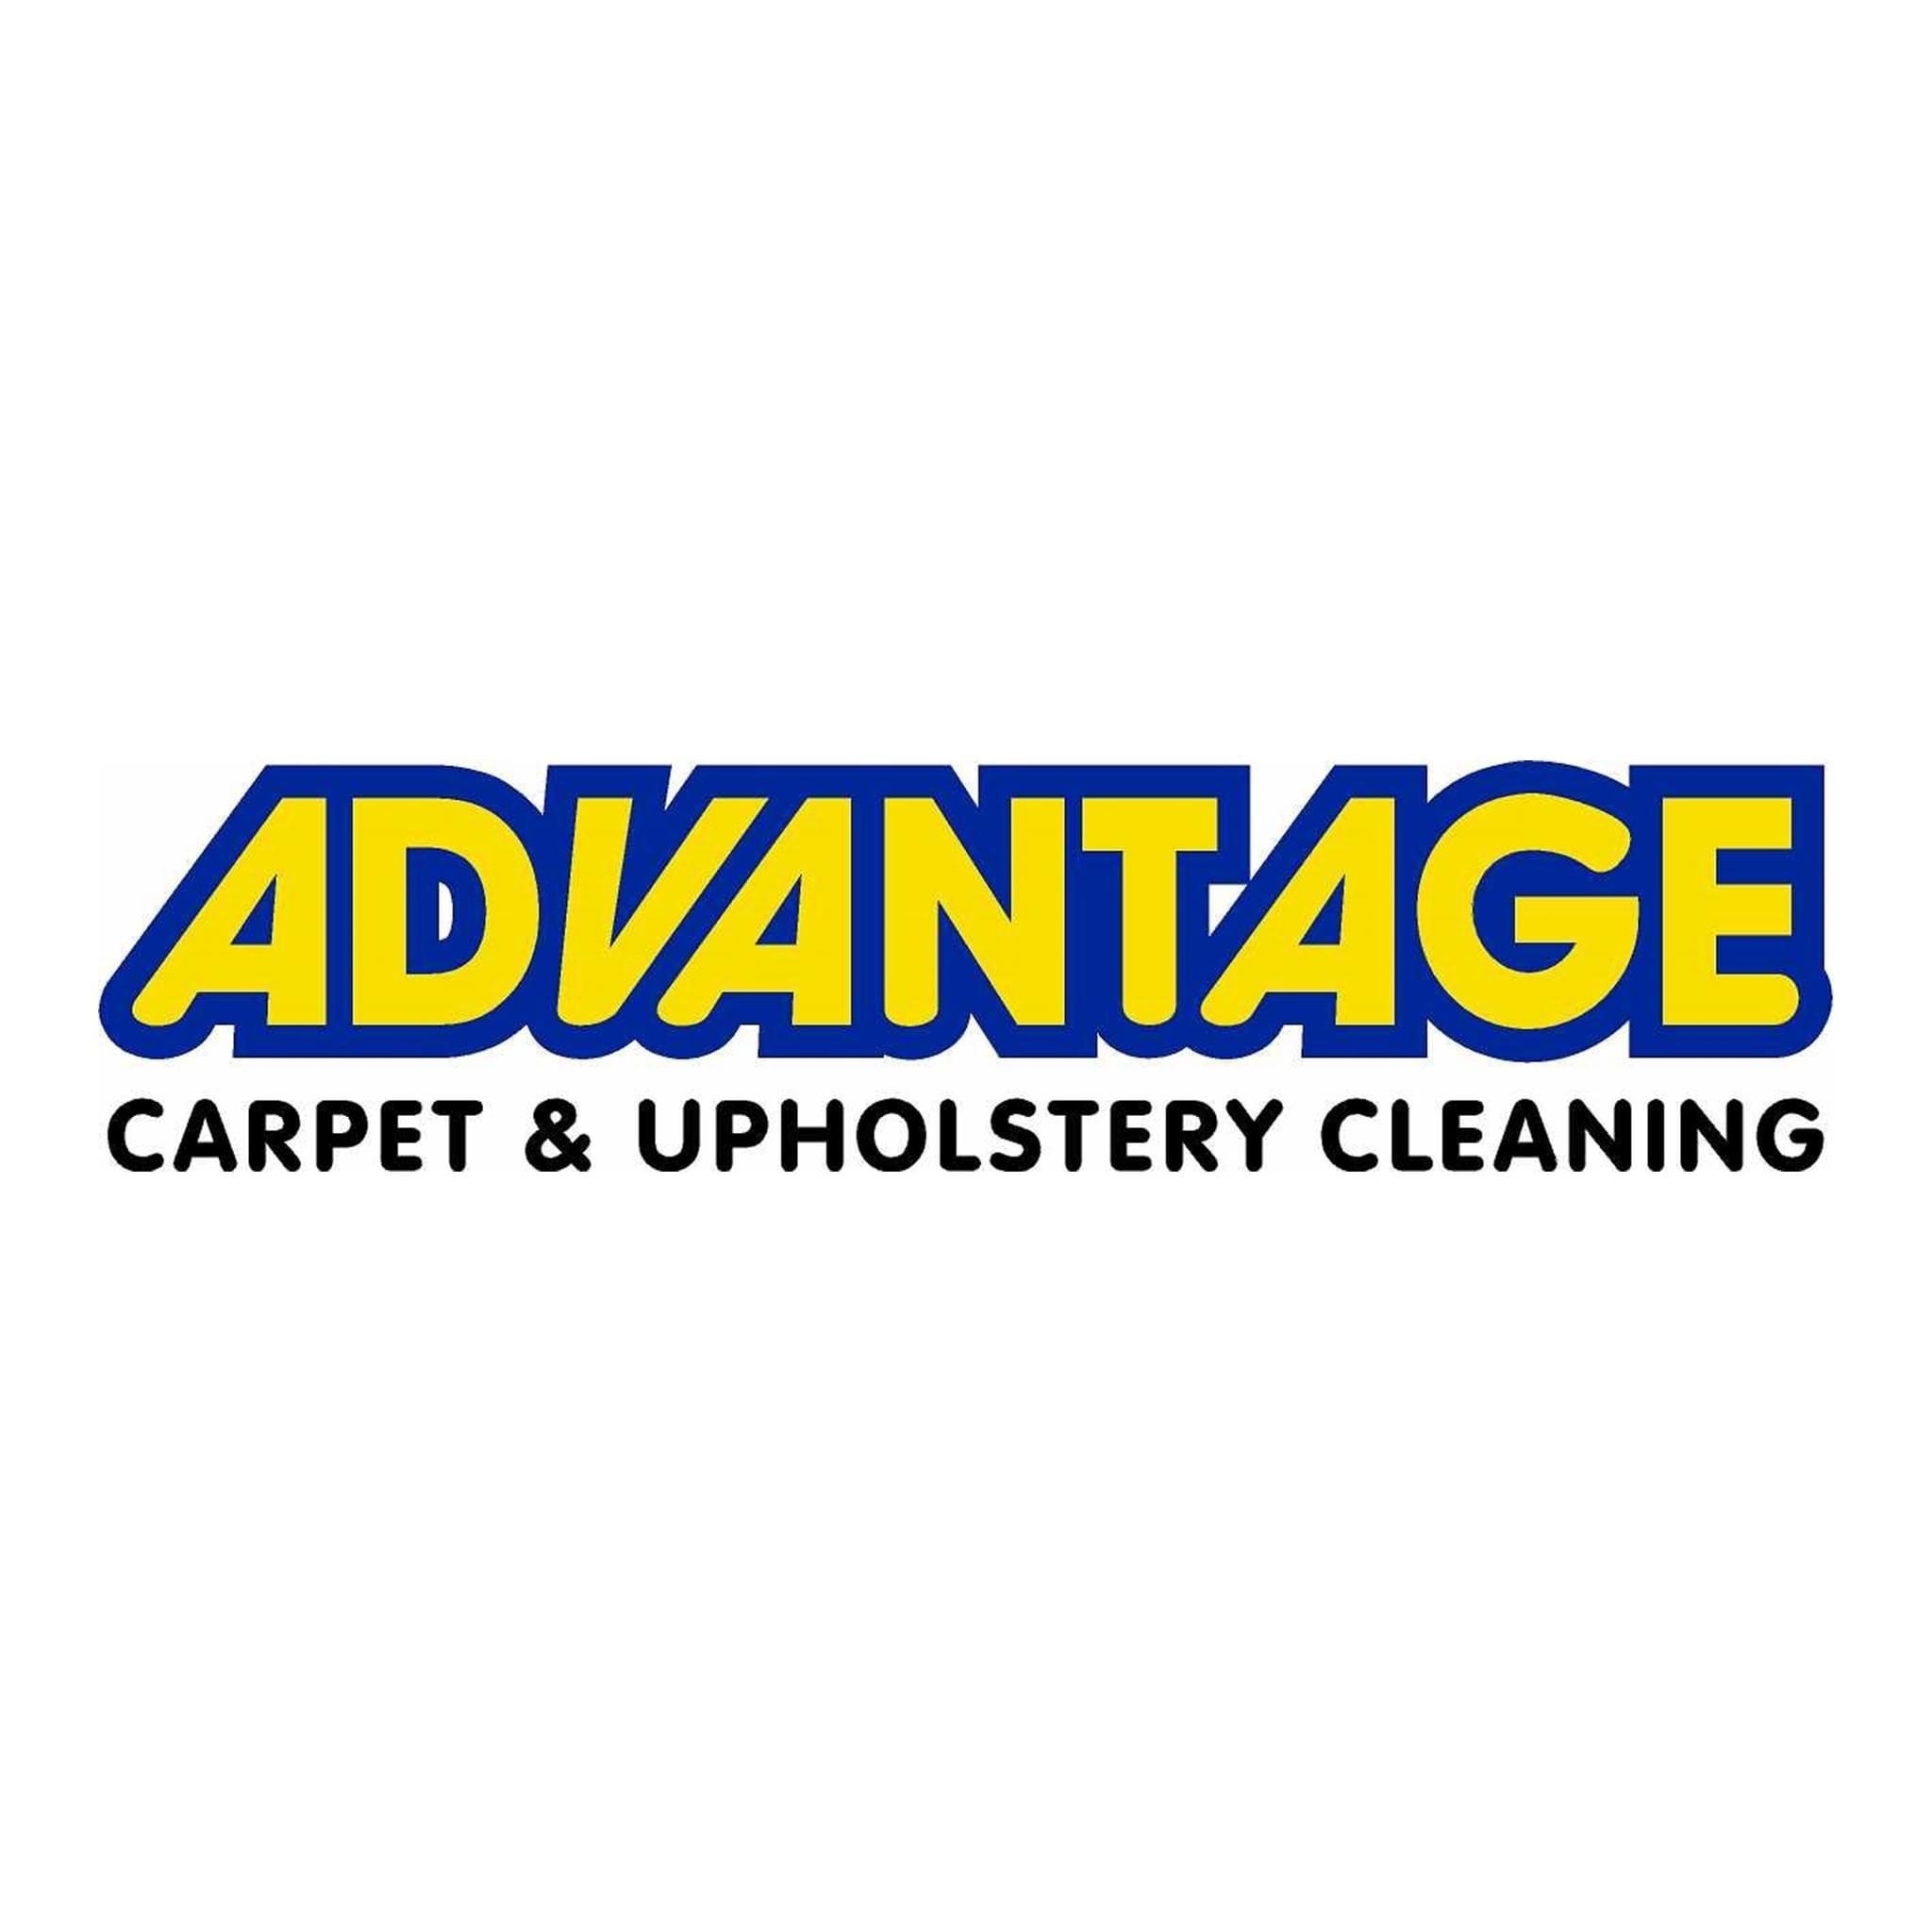 Advantage Carpet & Upholstery Cleaning Ltd. - Carpet & Rug Cleaning